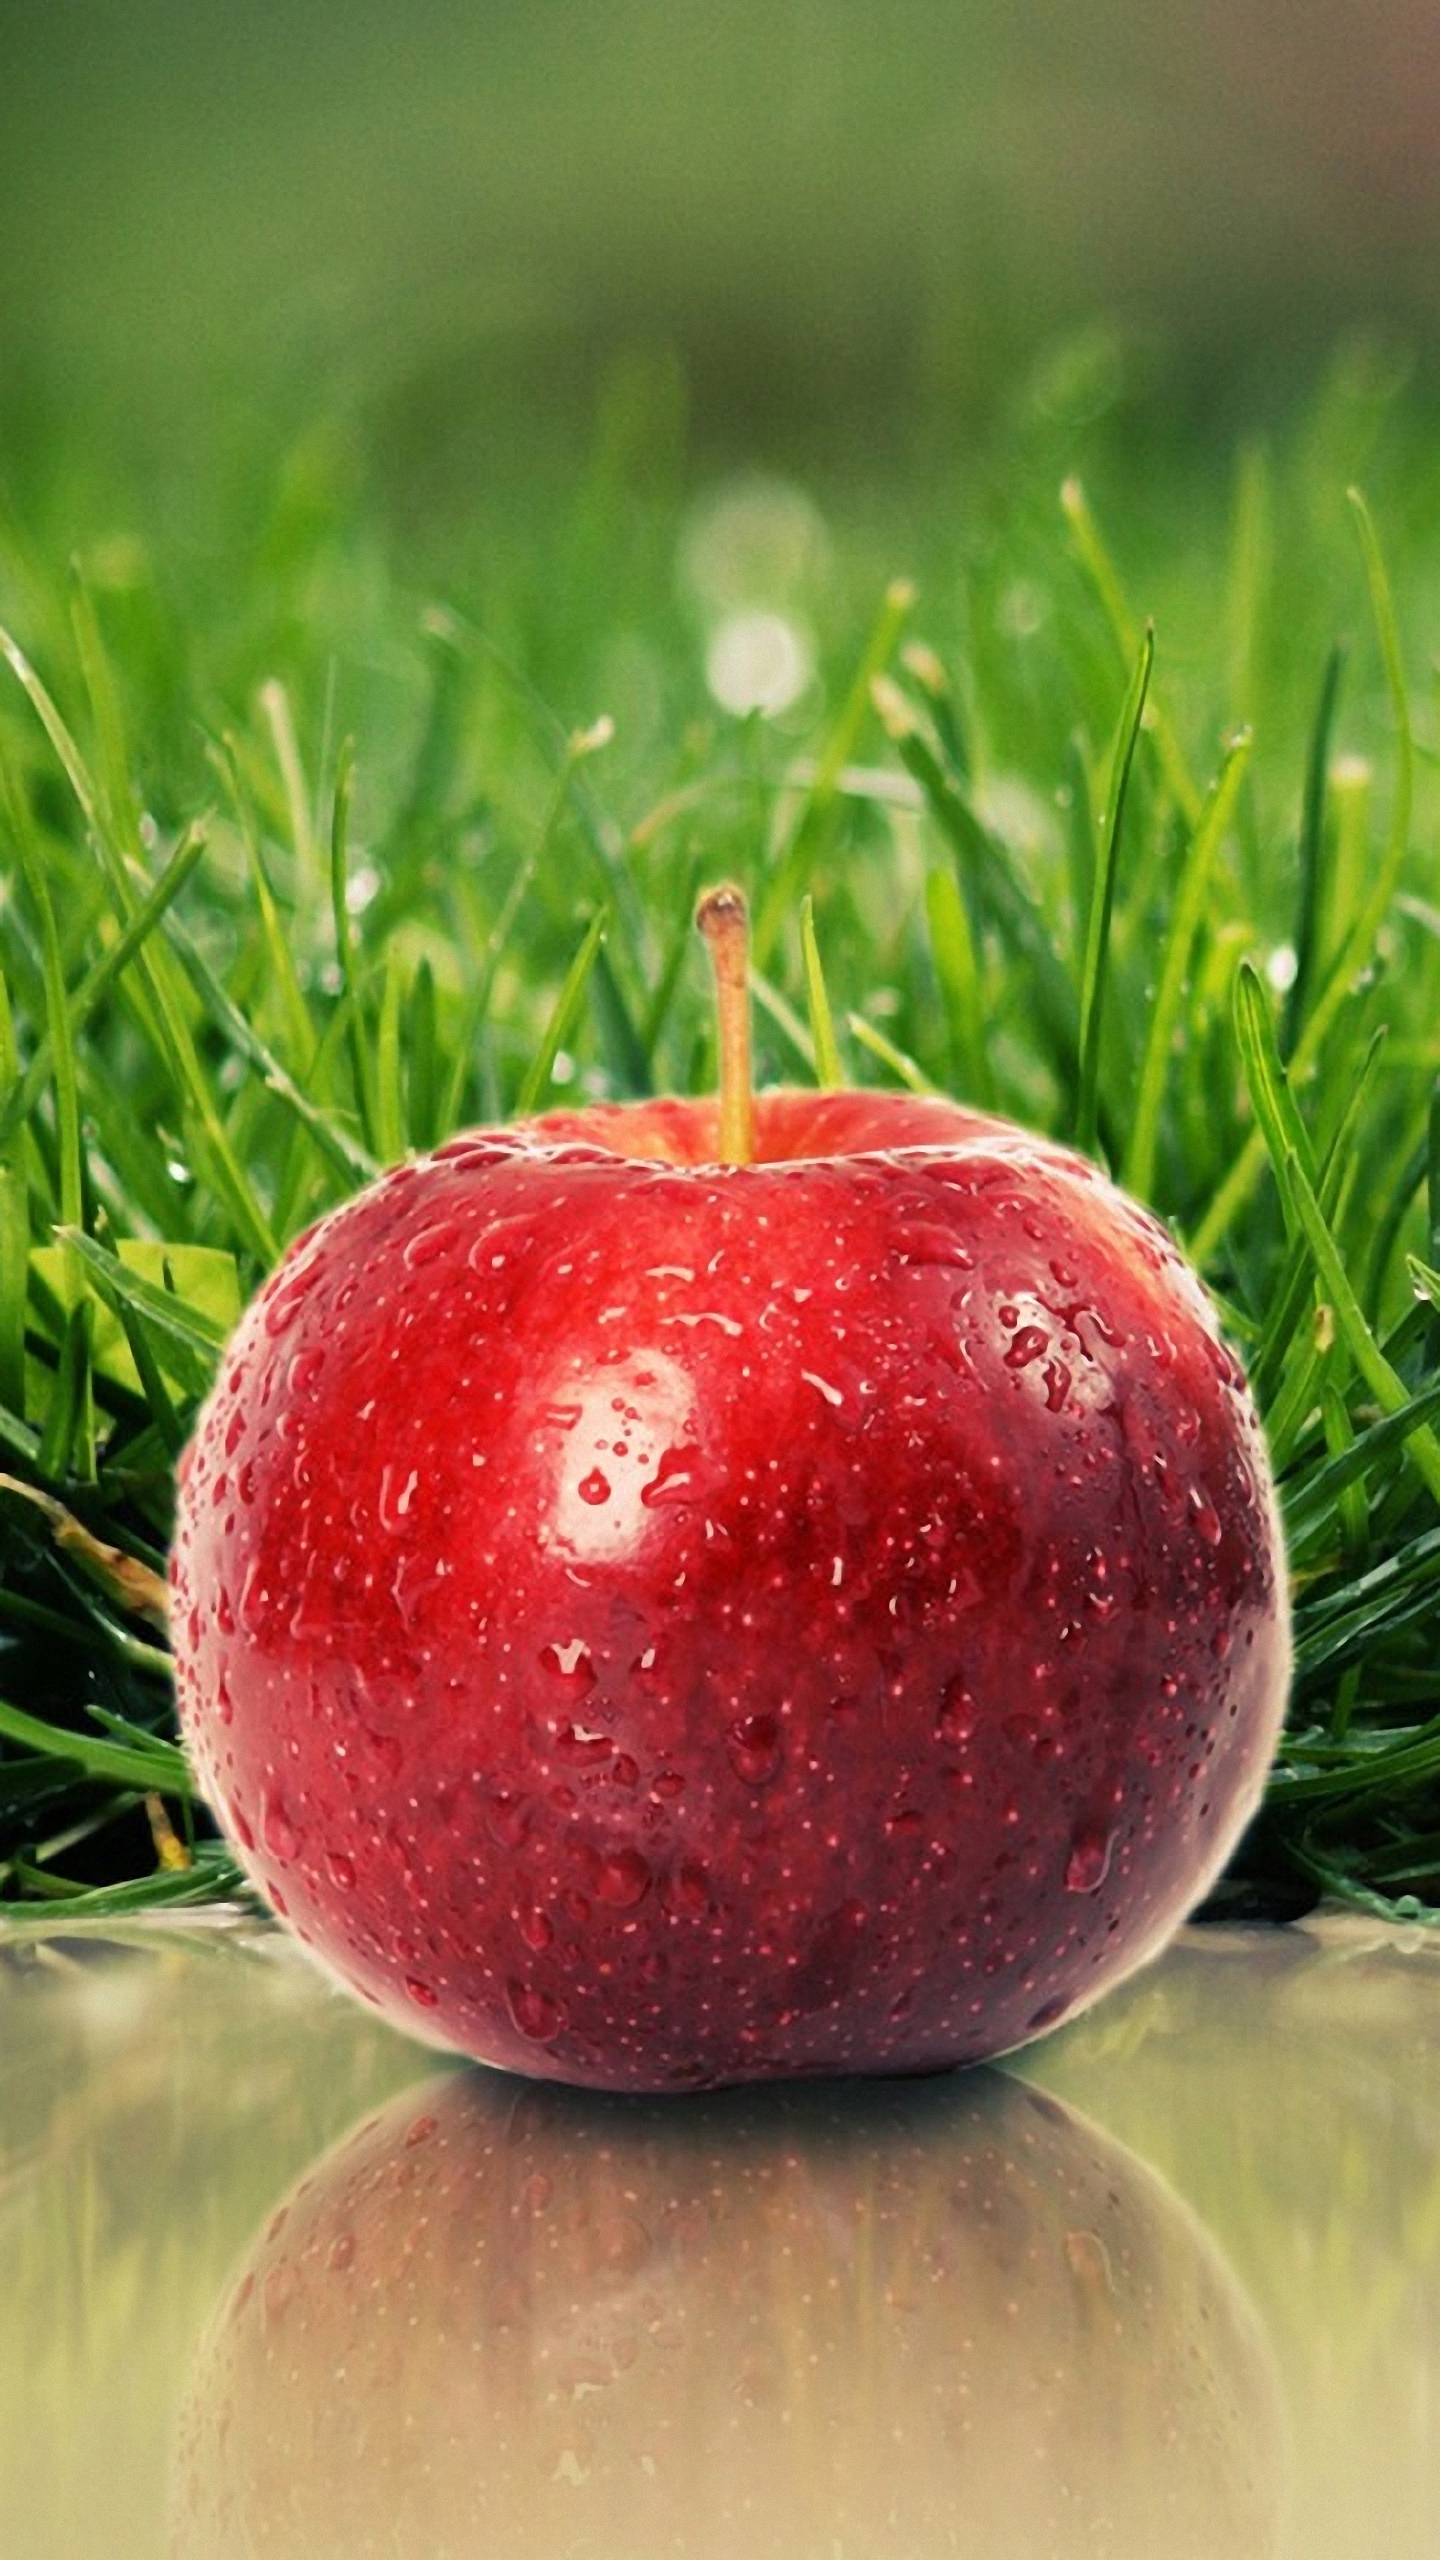 Hd Red Apple Htc One M9/x9 Wallpapers - Apple Fruit - 1440x2560 Wallpaper -  